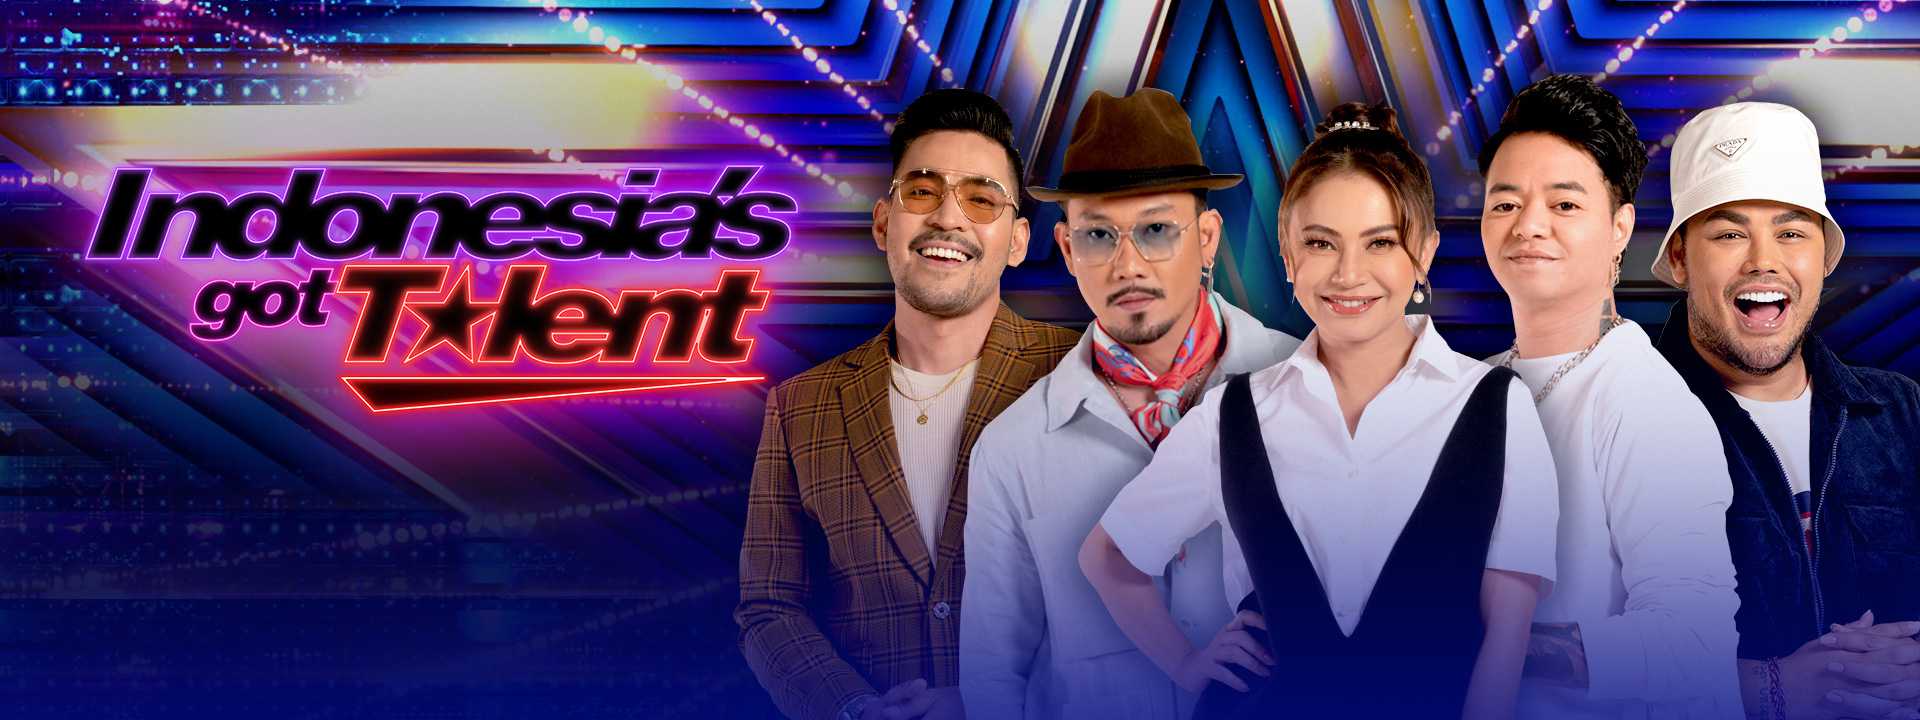 link streaming indonesia's got talent 2022